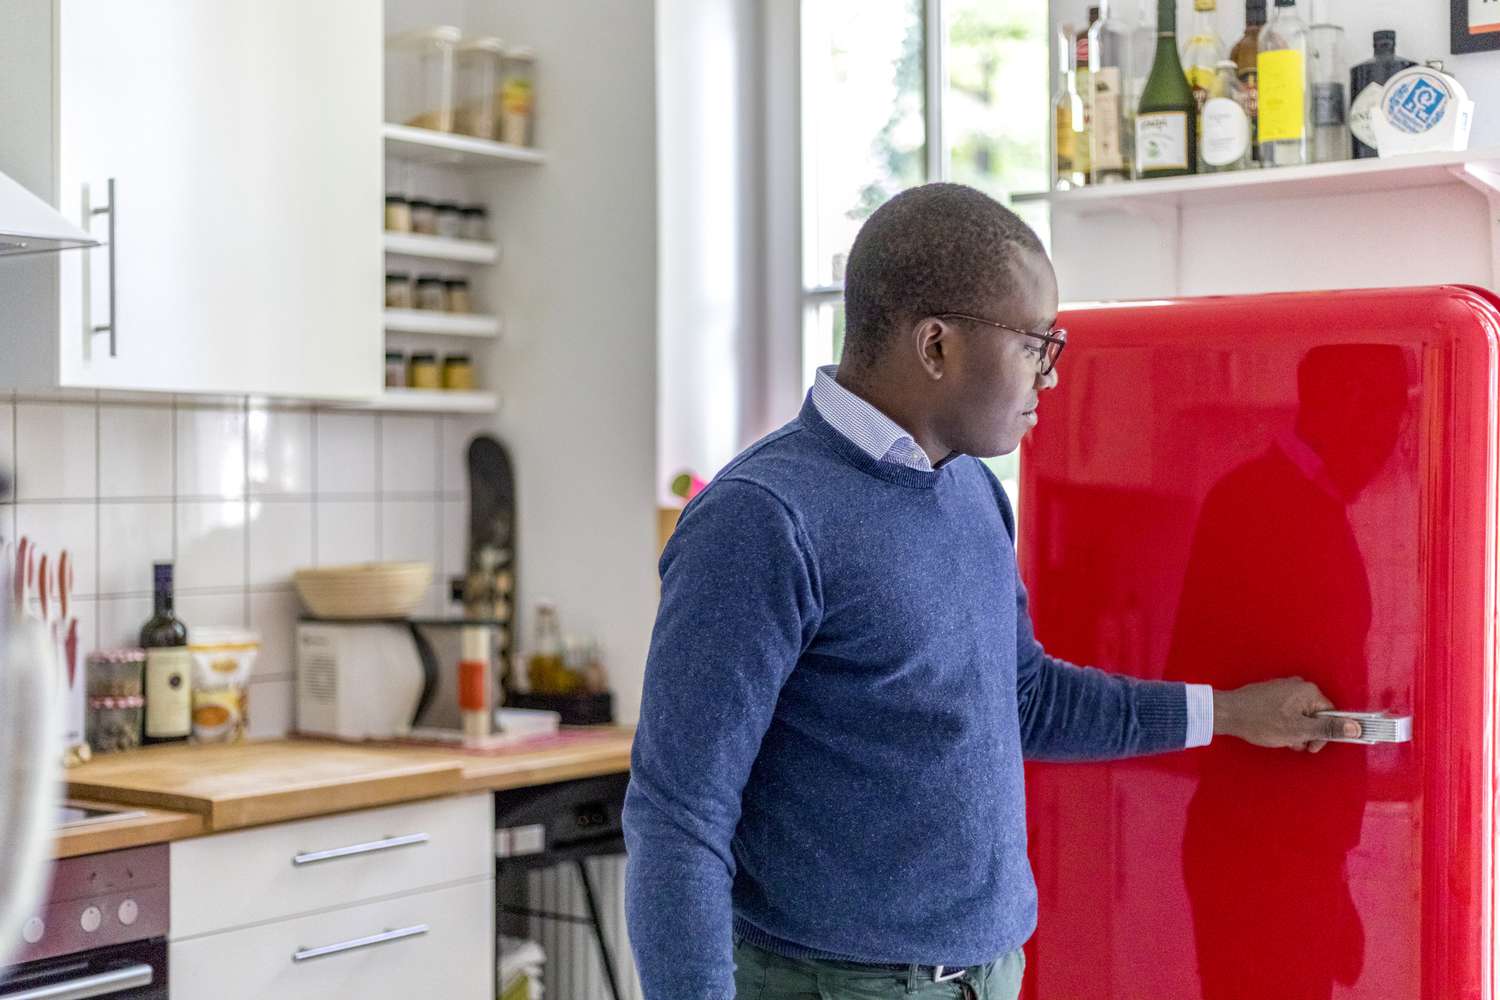 Man opening a red refrigerator.